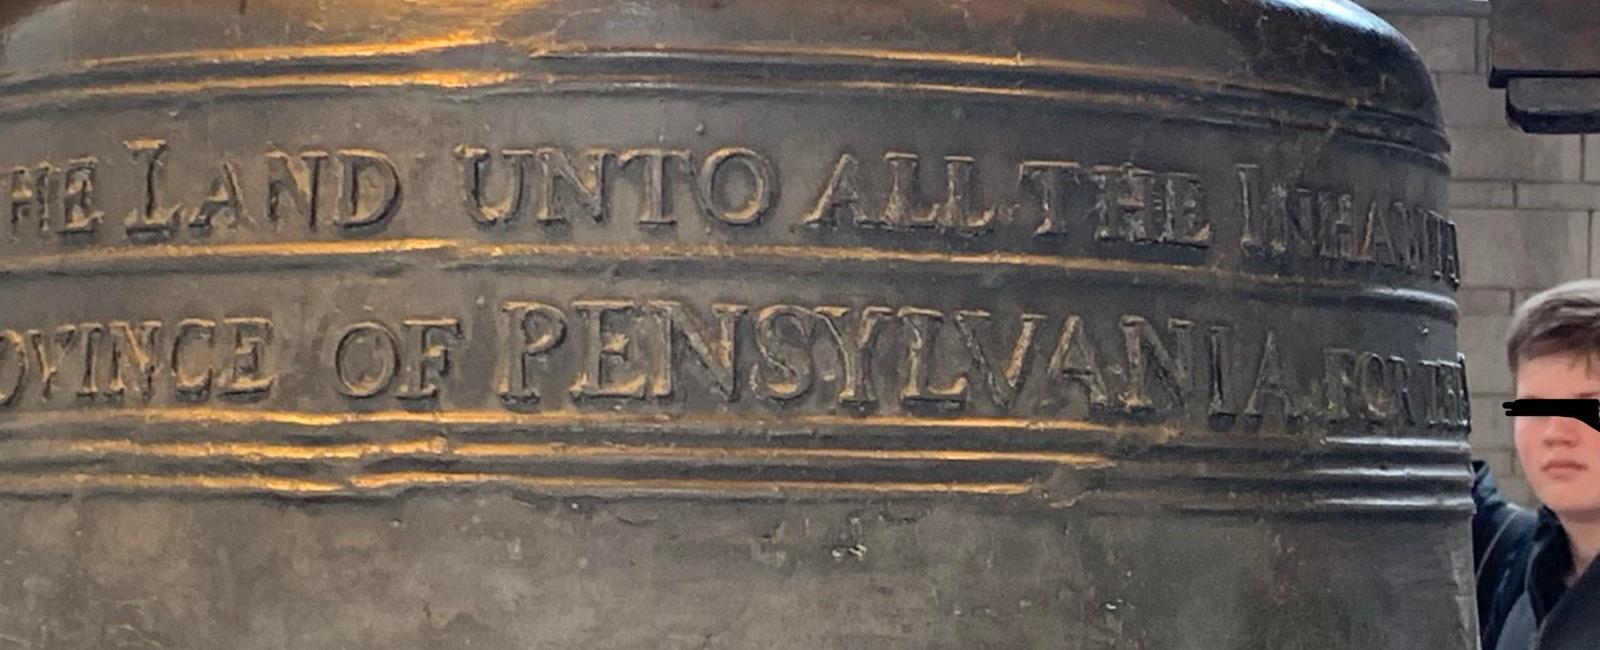 The word pennsylvania is misspelled on the liberty bell